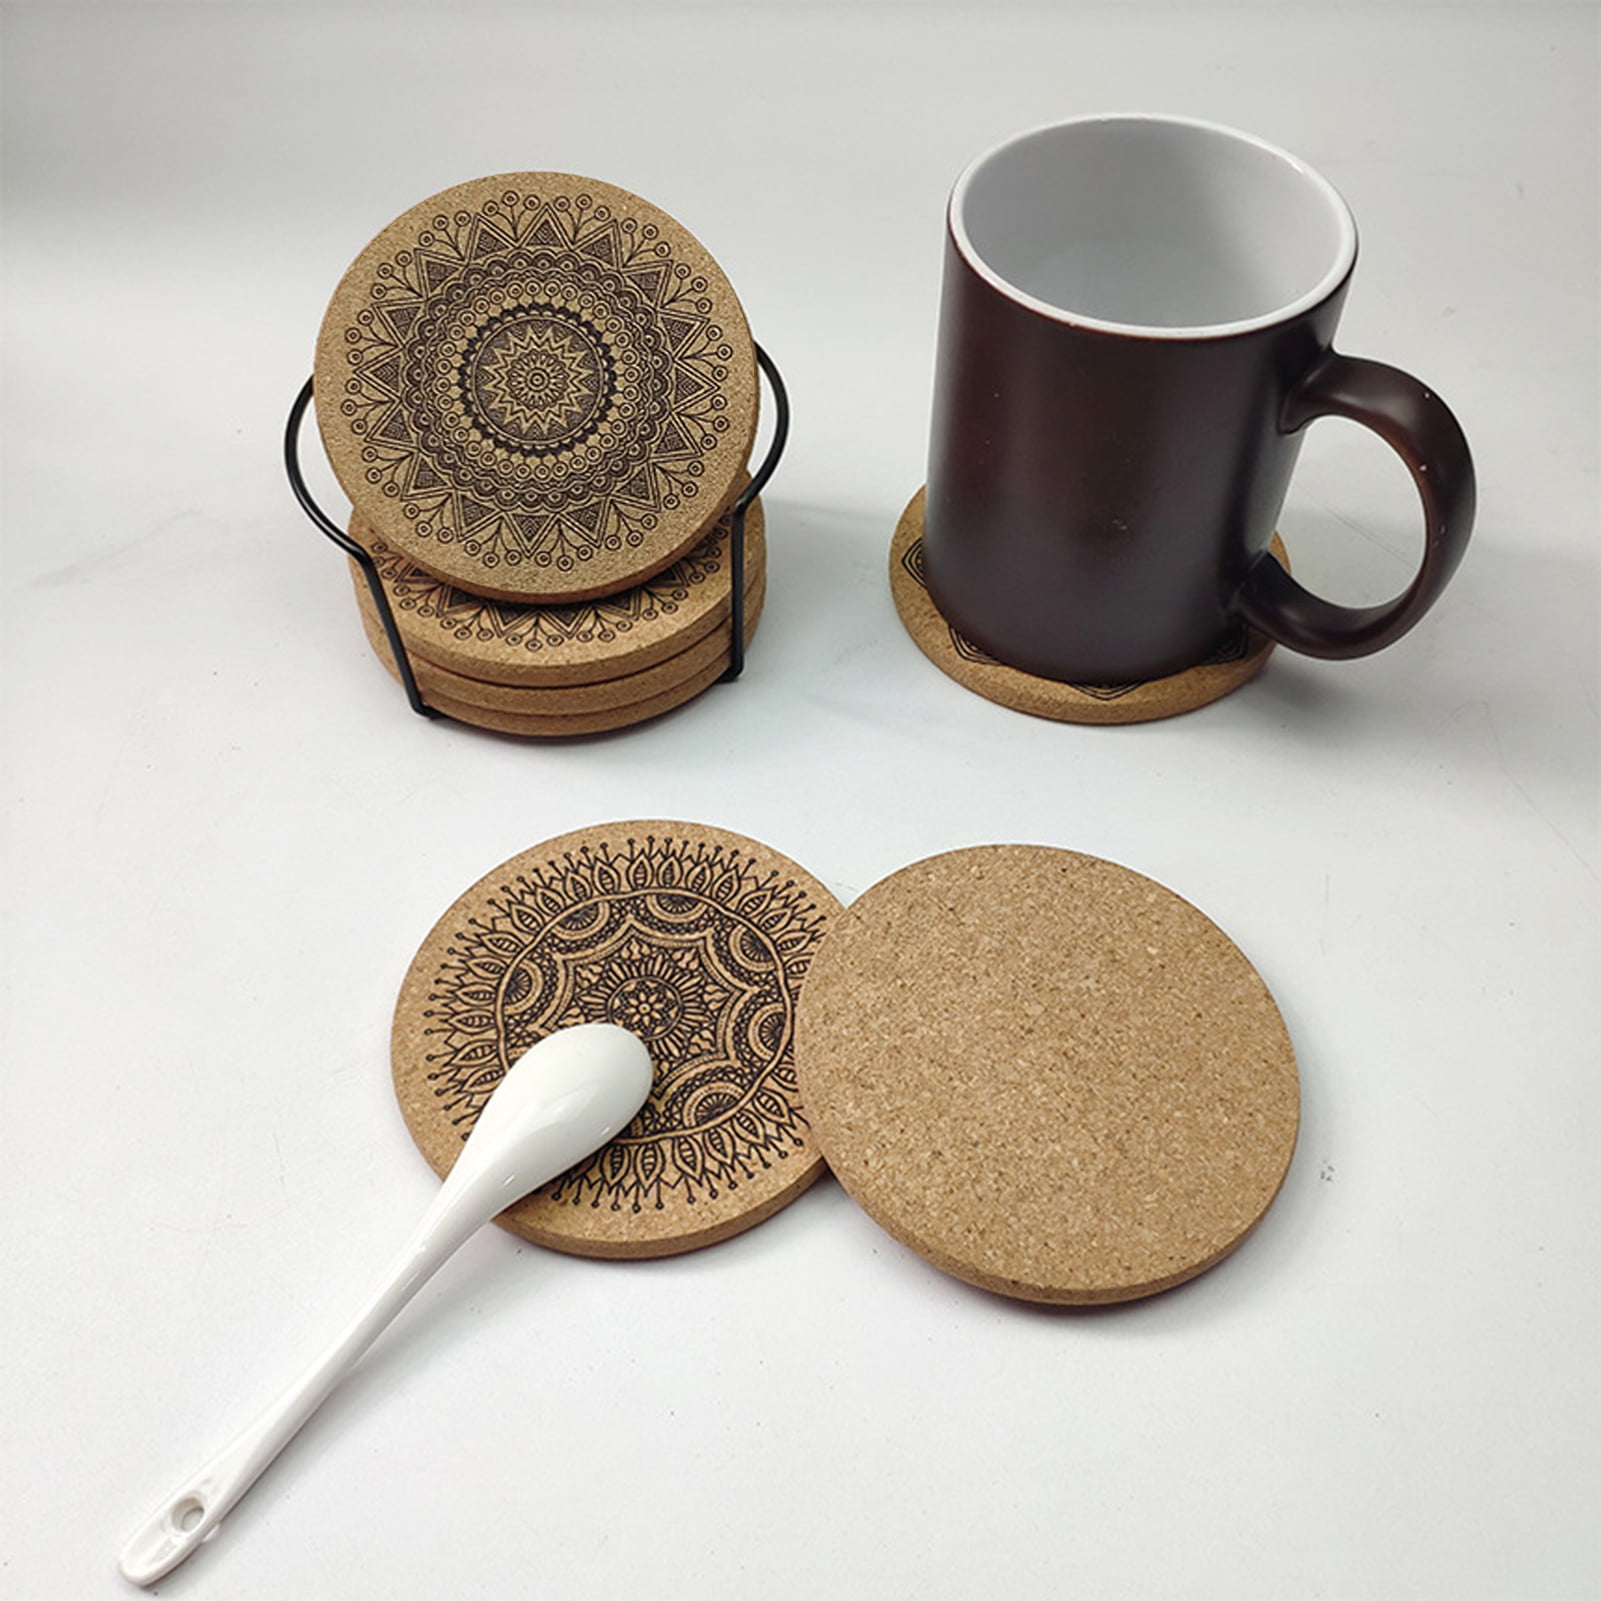 Wood Coasters - Round Outdoor Cup Coasters for Wooden Table Protection,  Coffee Trivet, Cups and Mugs - Cool Drink Coaster Gift,Beech，G80985